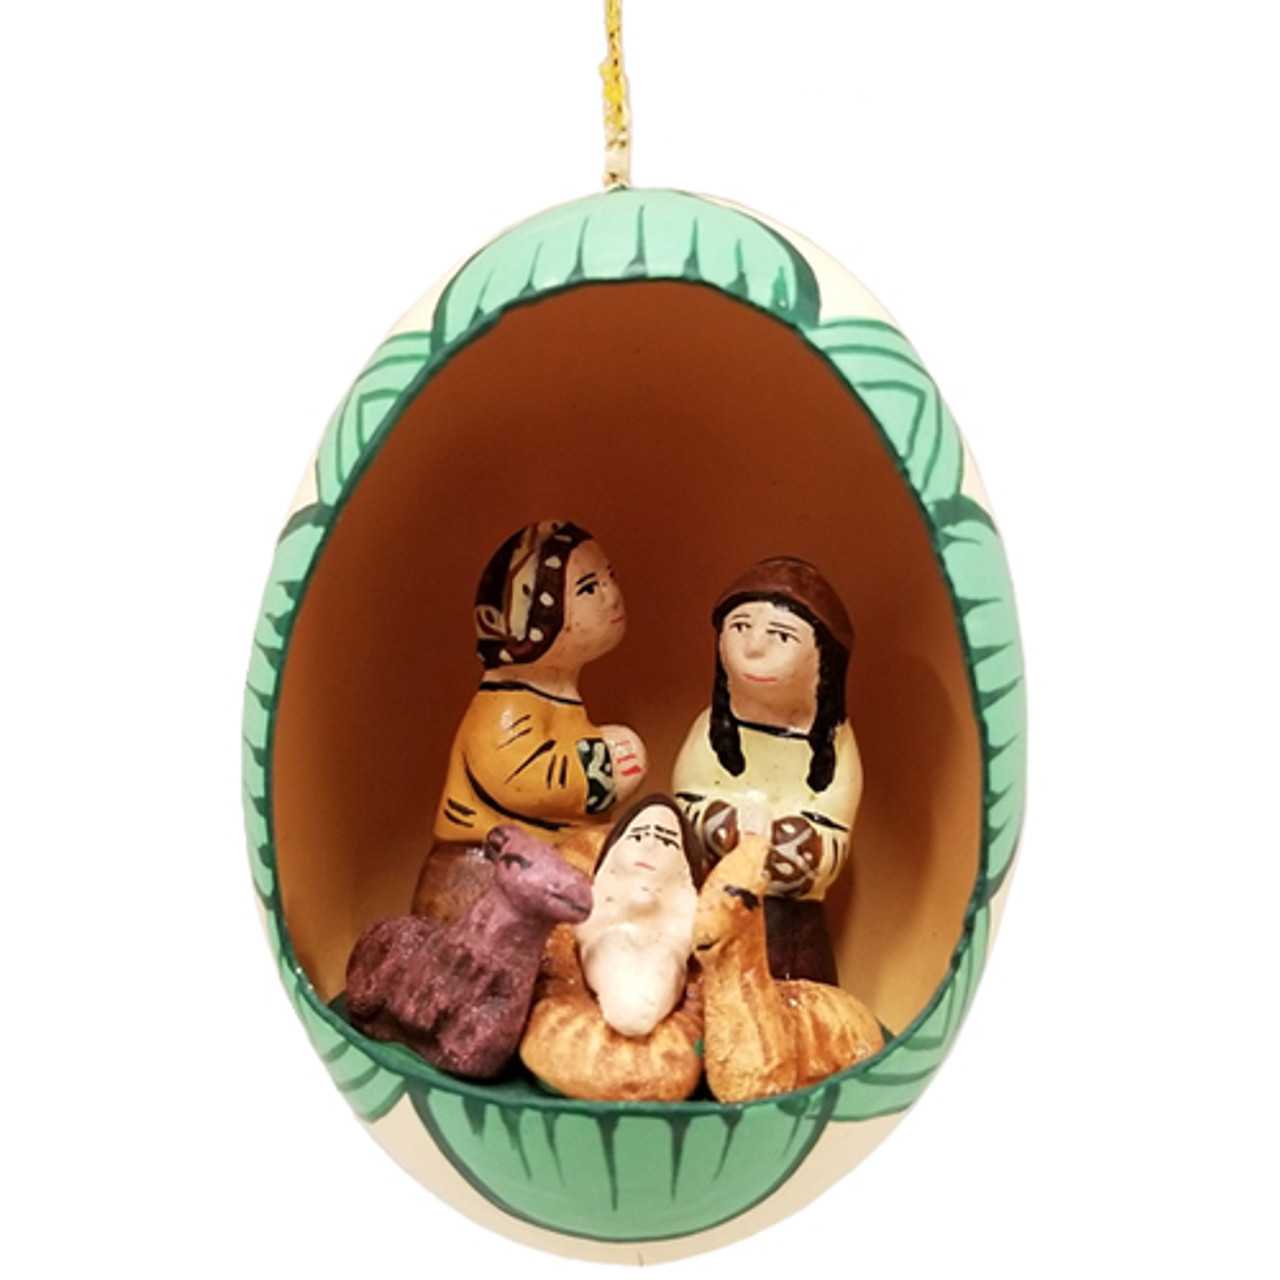 one piece 12 cm or 5 inch high Egg with nativity carved within or inside 